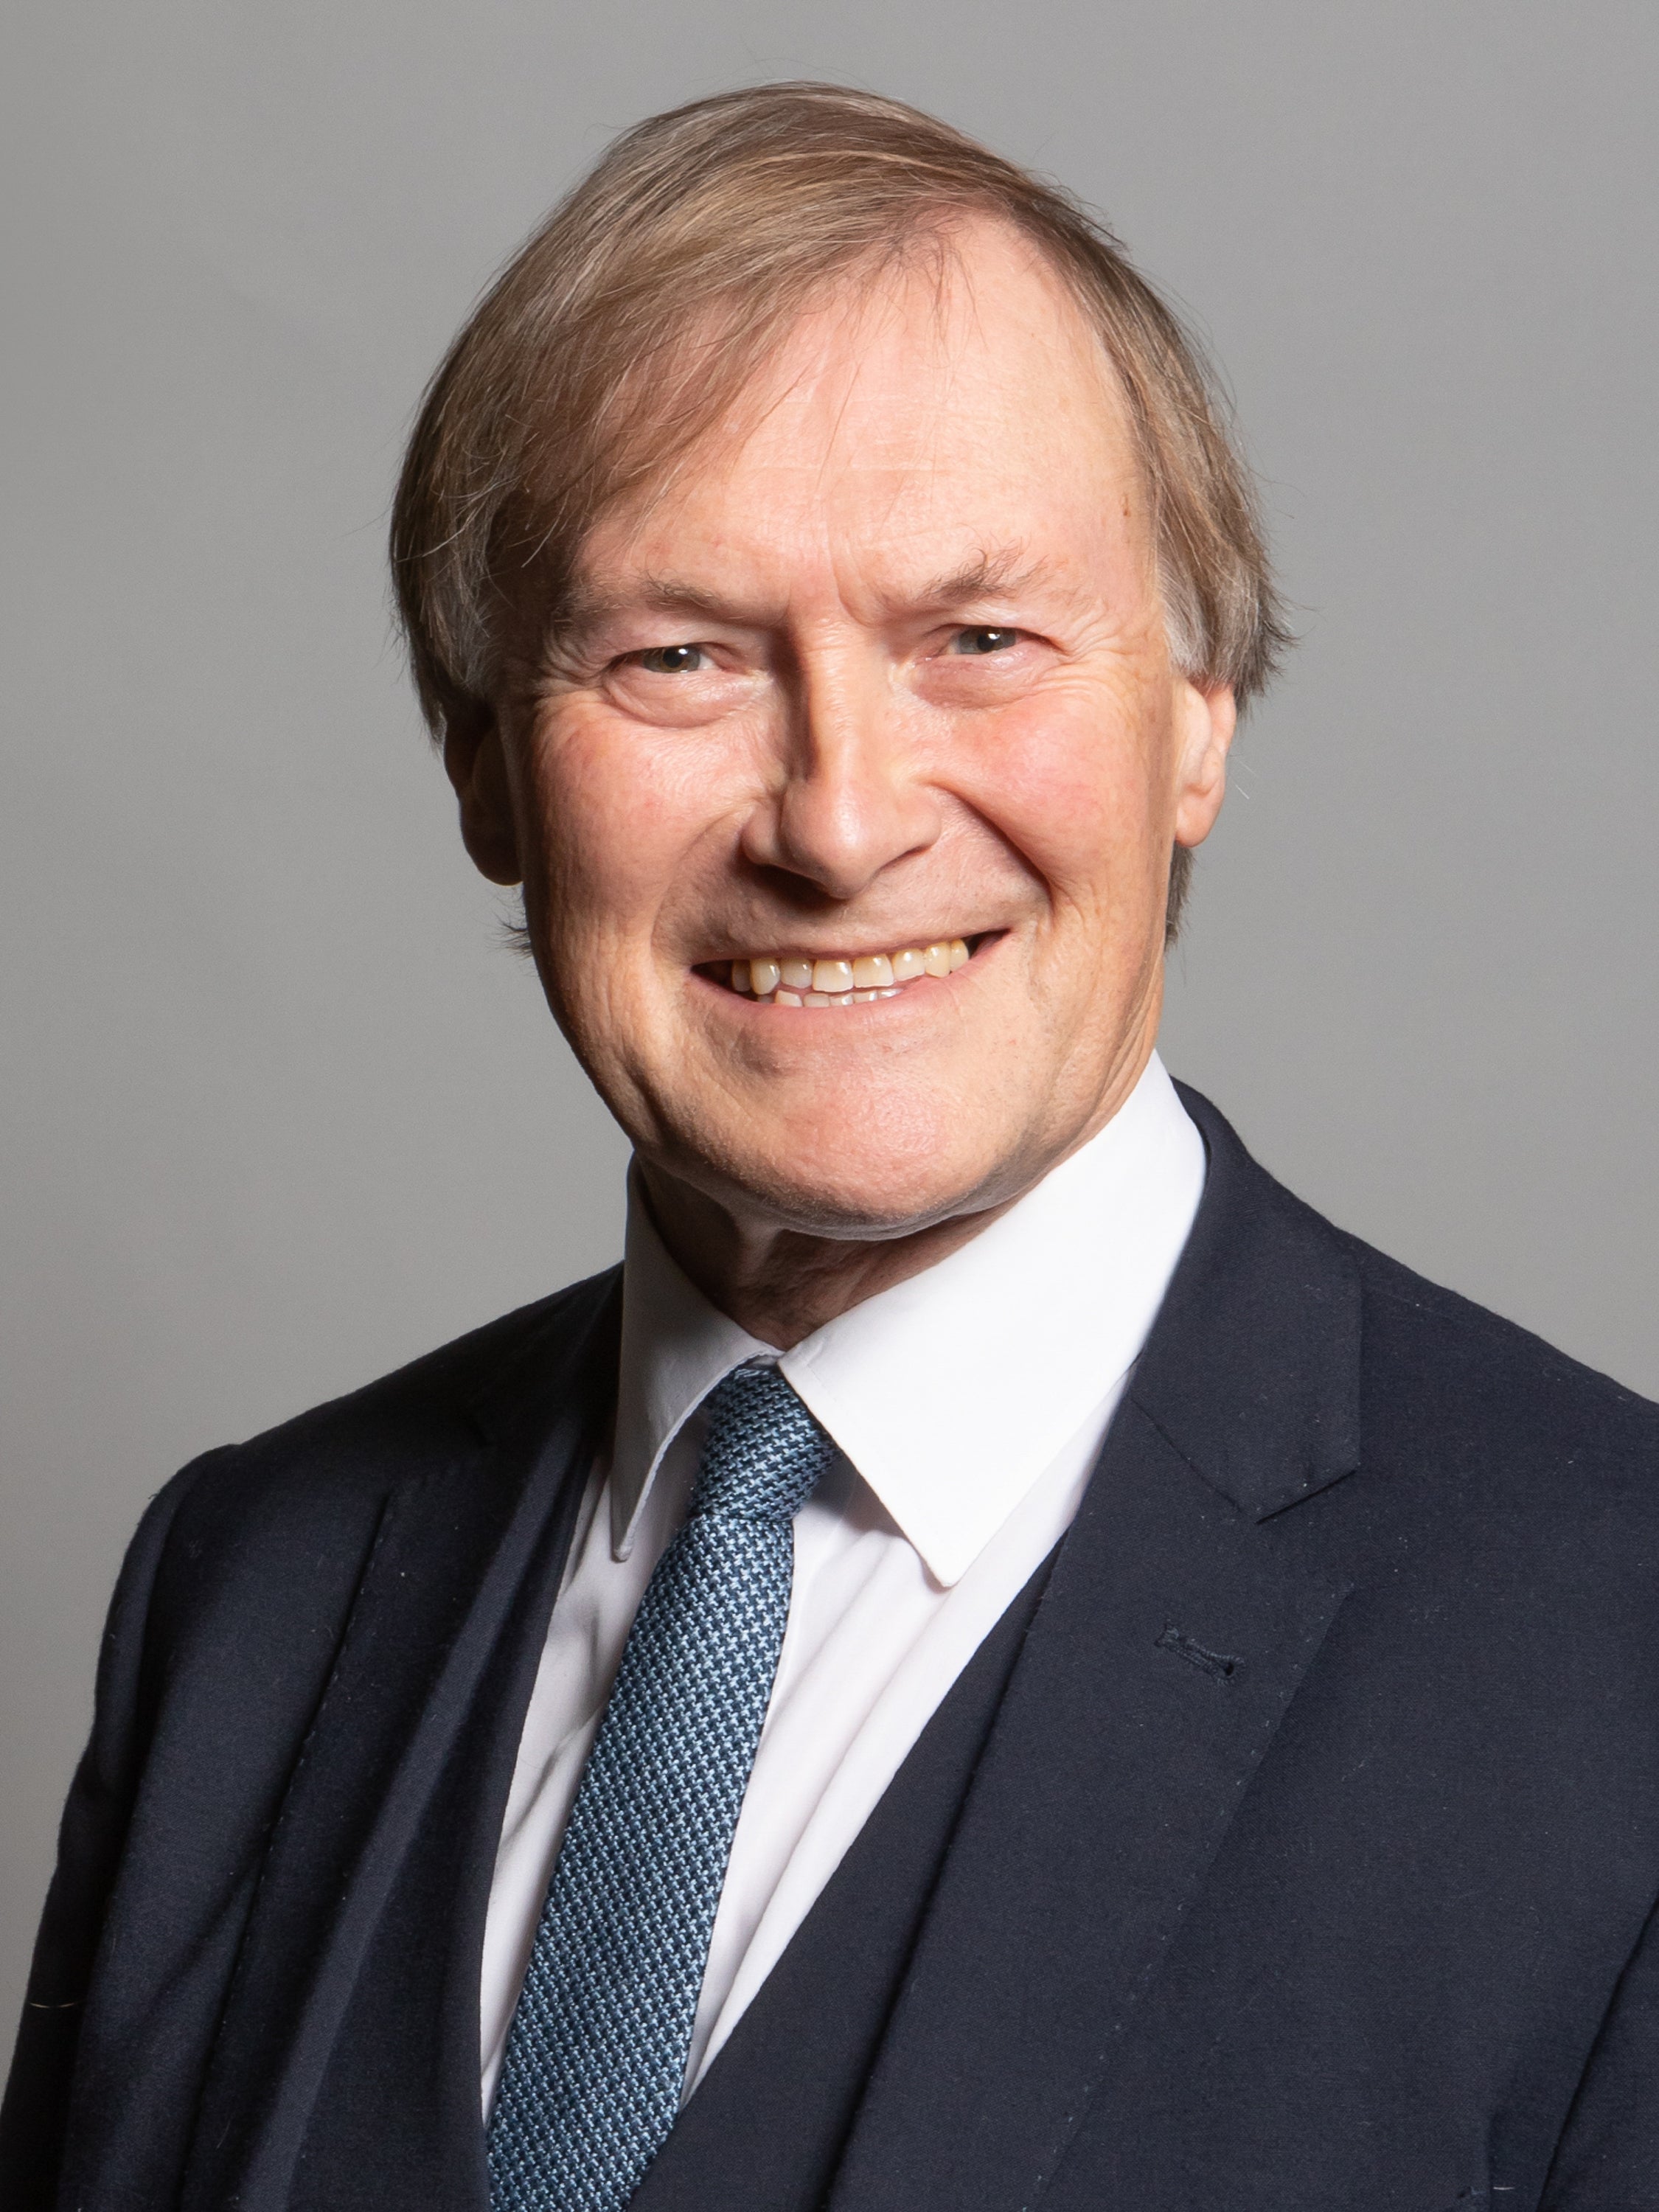 Sir David Amess was stabbed to death during a constituency surgery in Leigh-on-Sea in Essex in October (Chris McAndrew/PA)